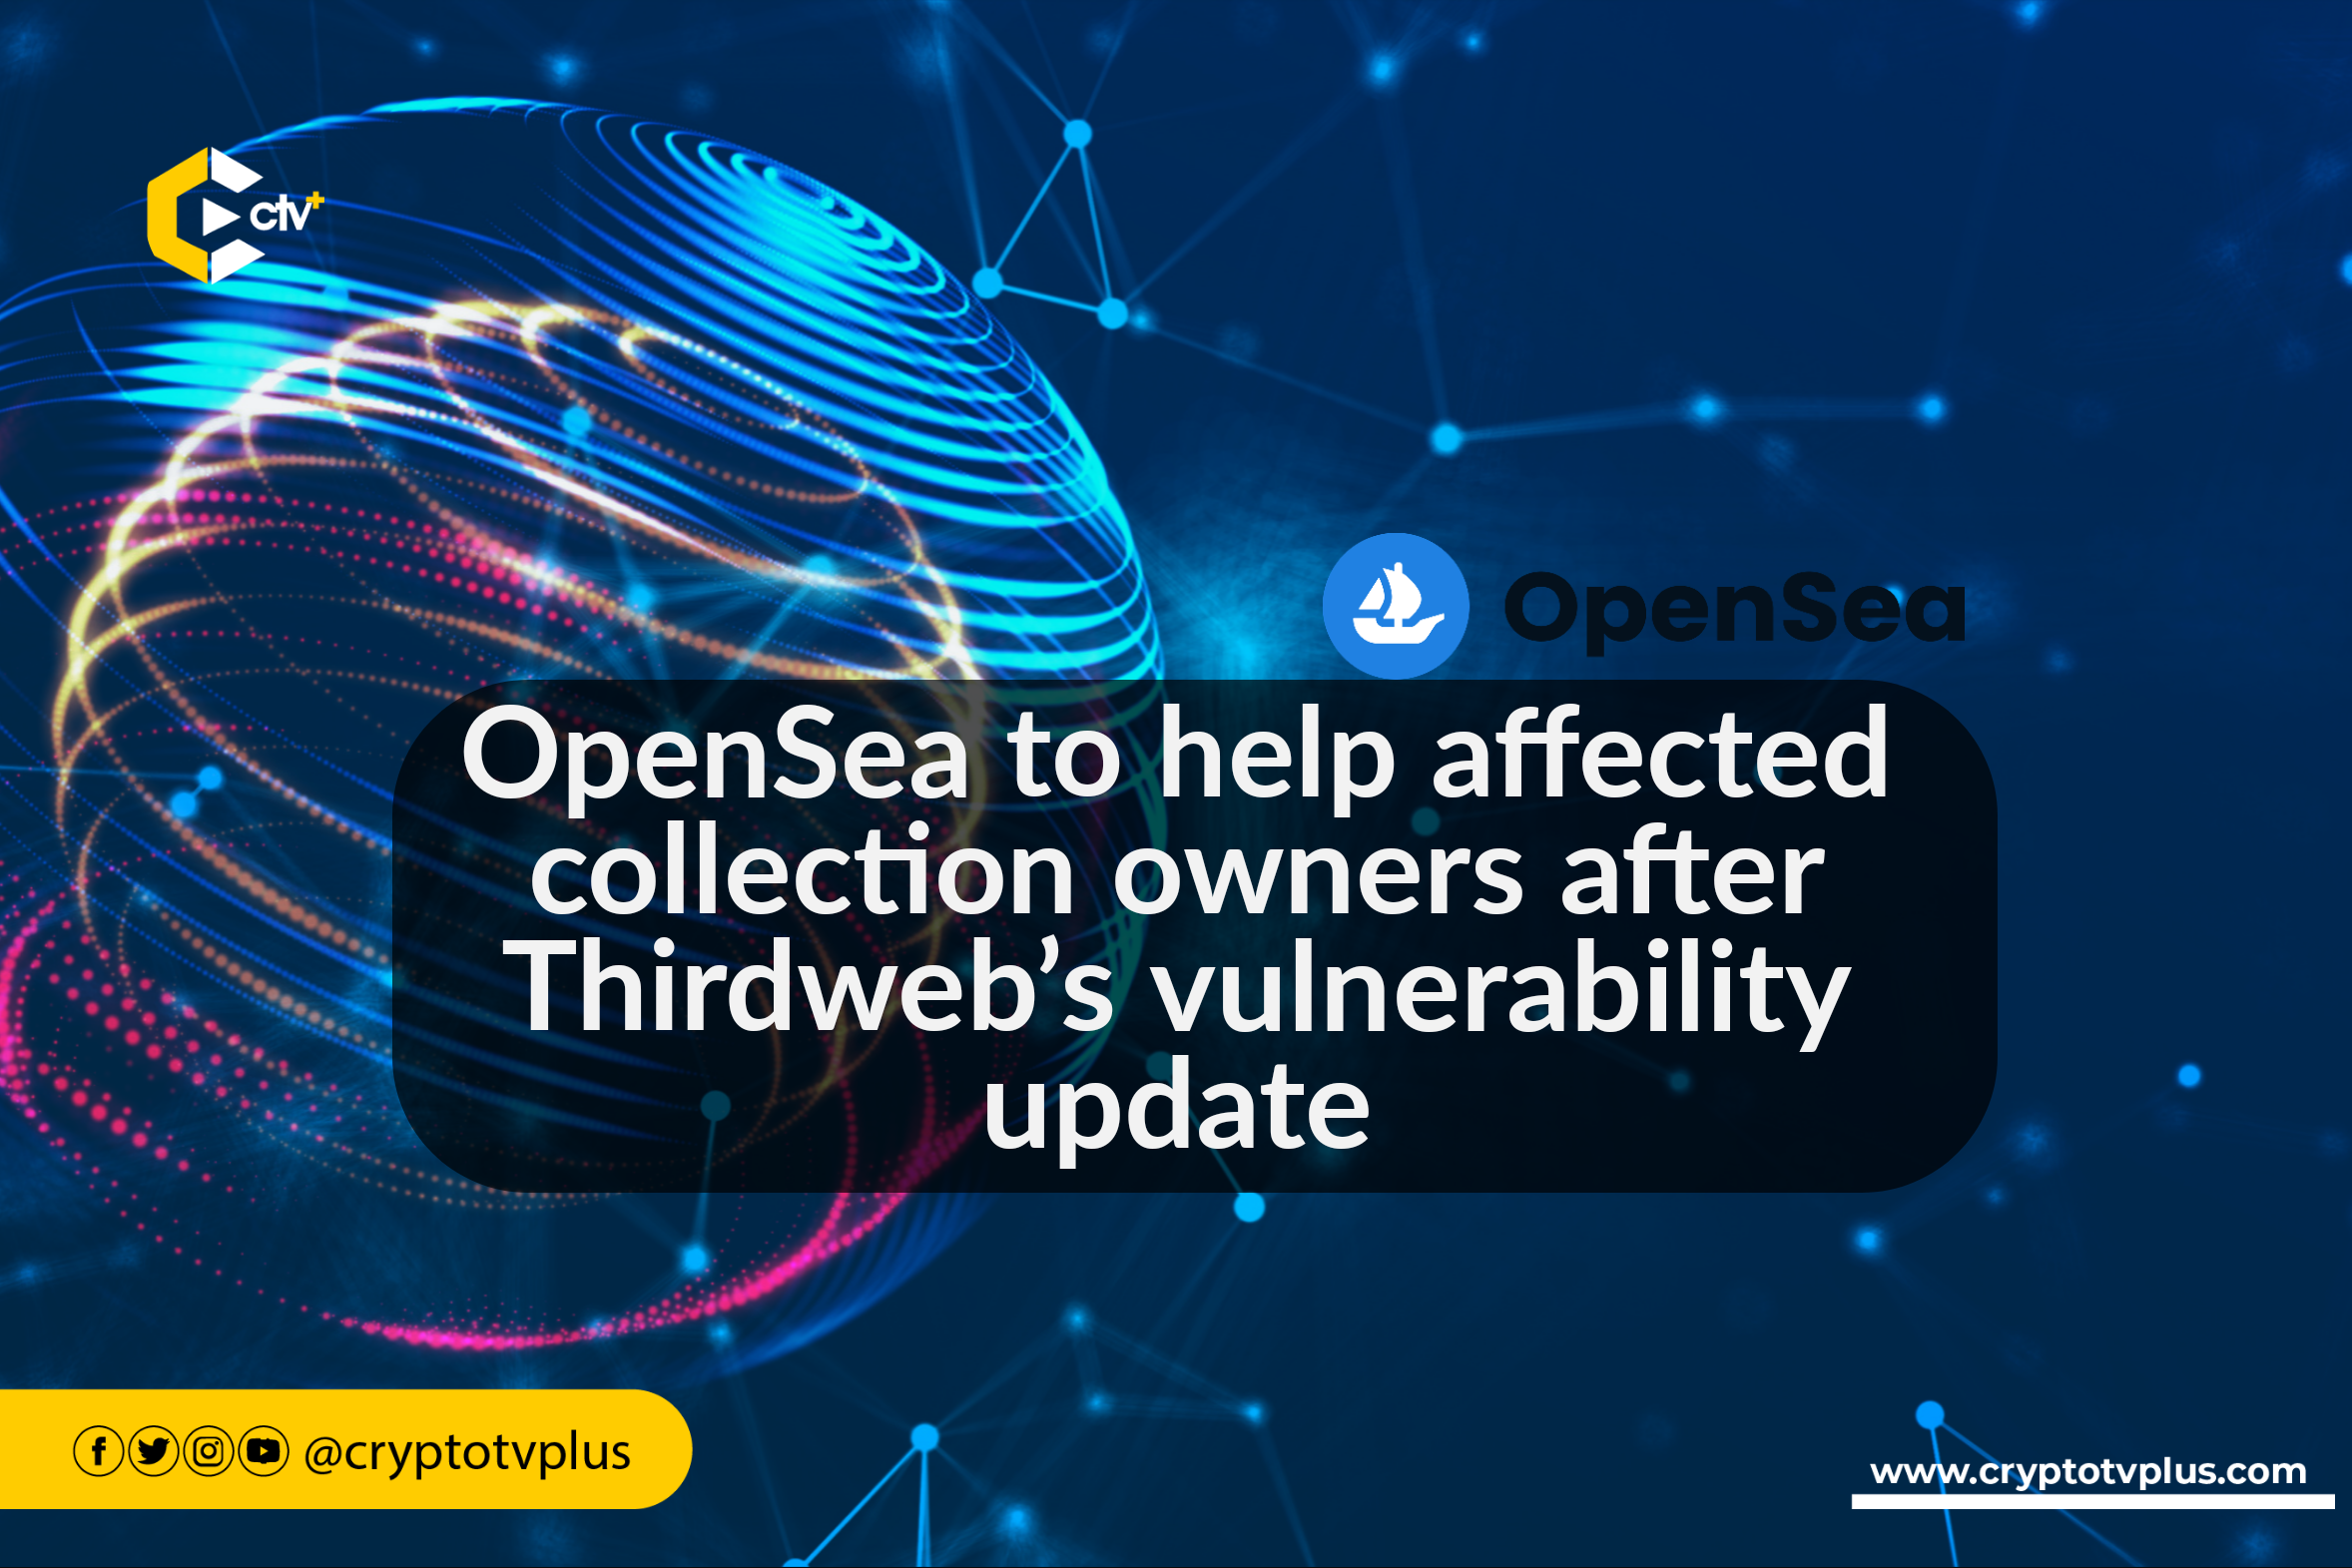 OpenSea: The Ultimate Guide to Its Tools, Features, and Controversies